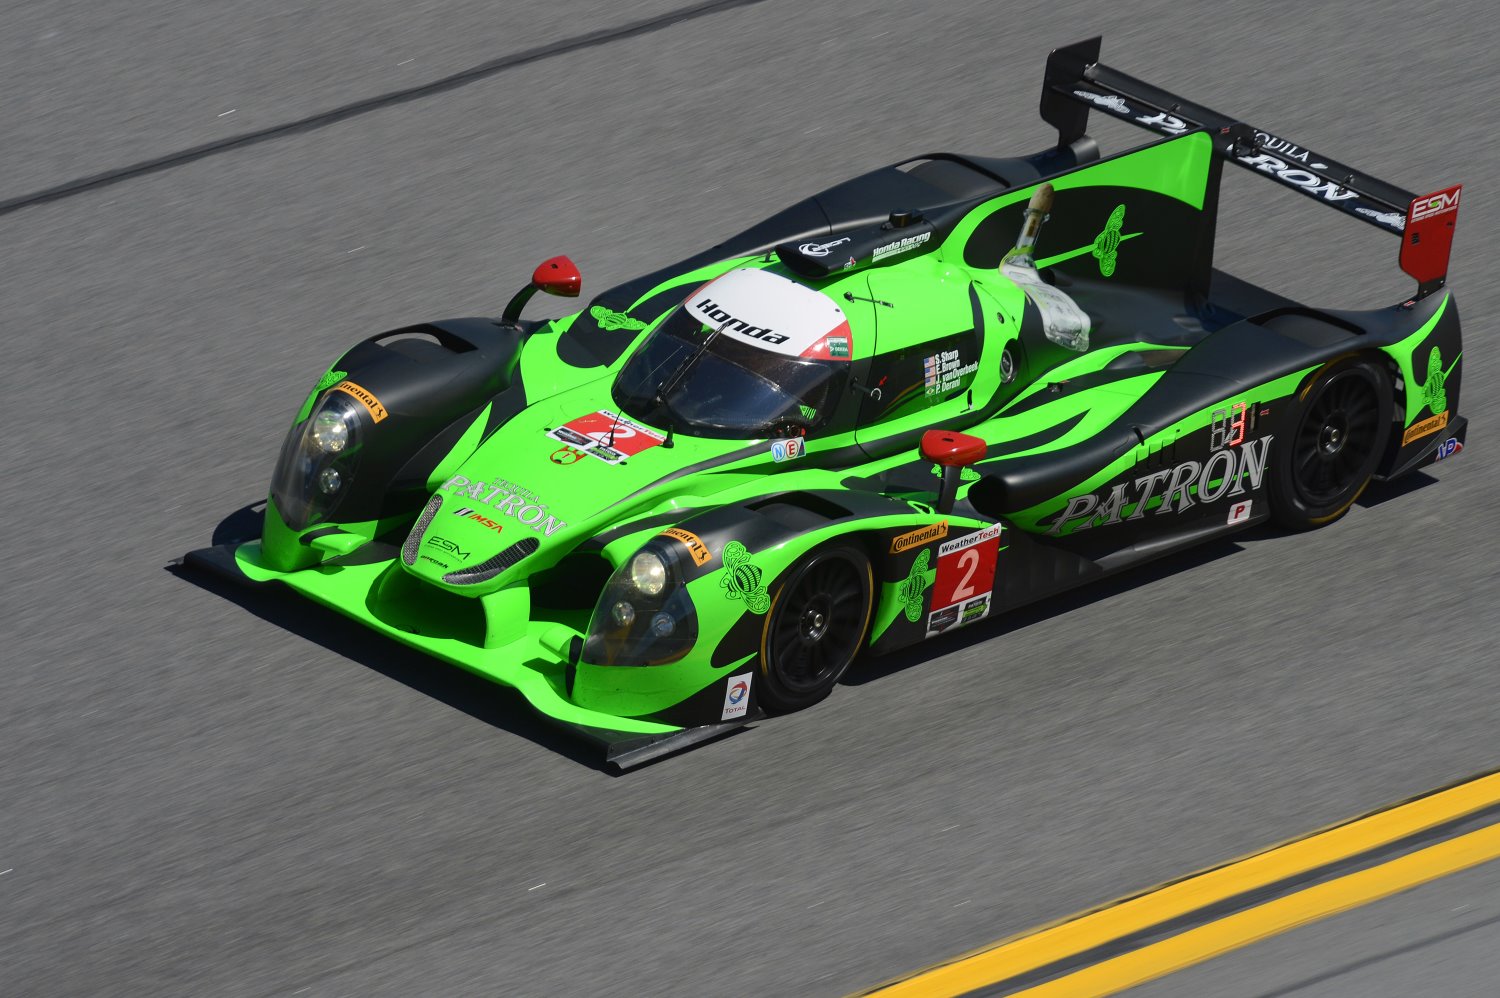 Pipo Derani en route to victory at the Rolex 24 